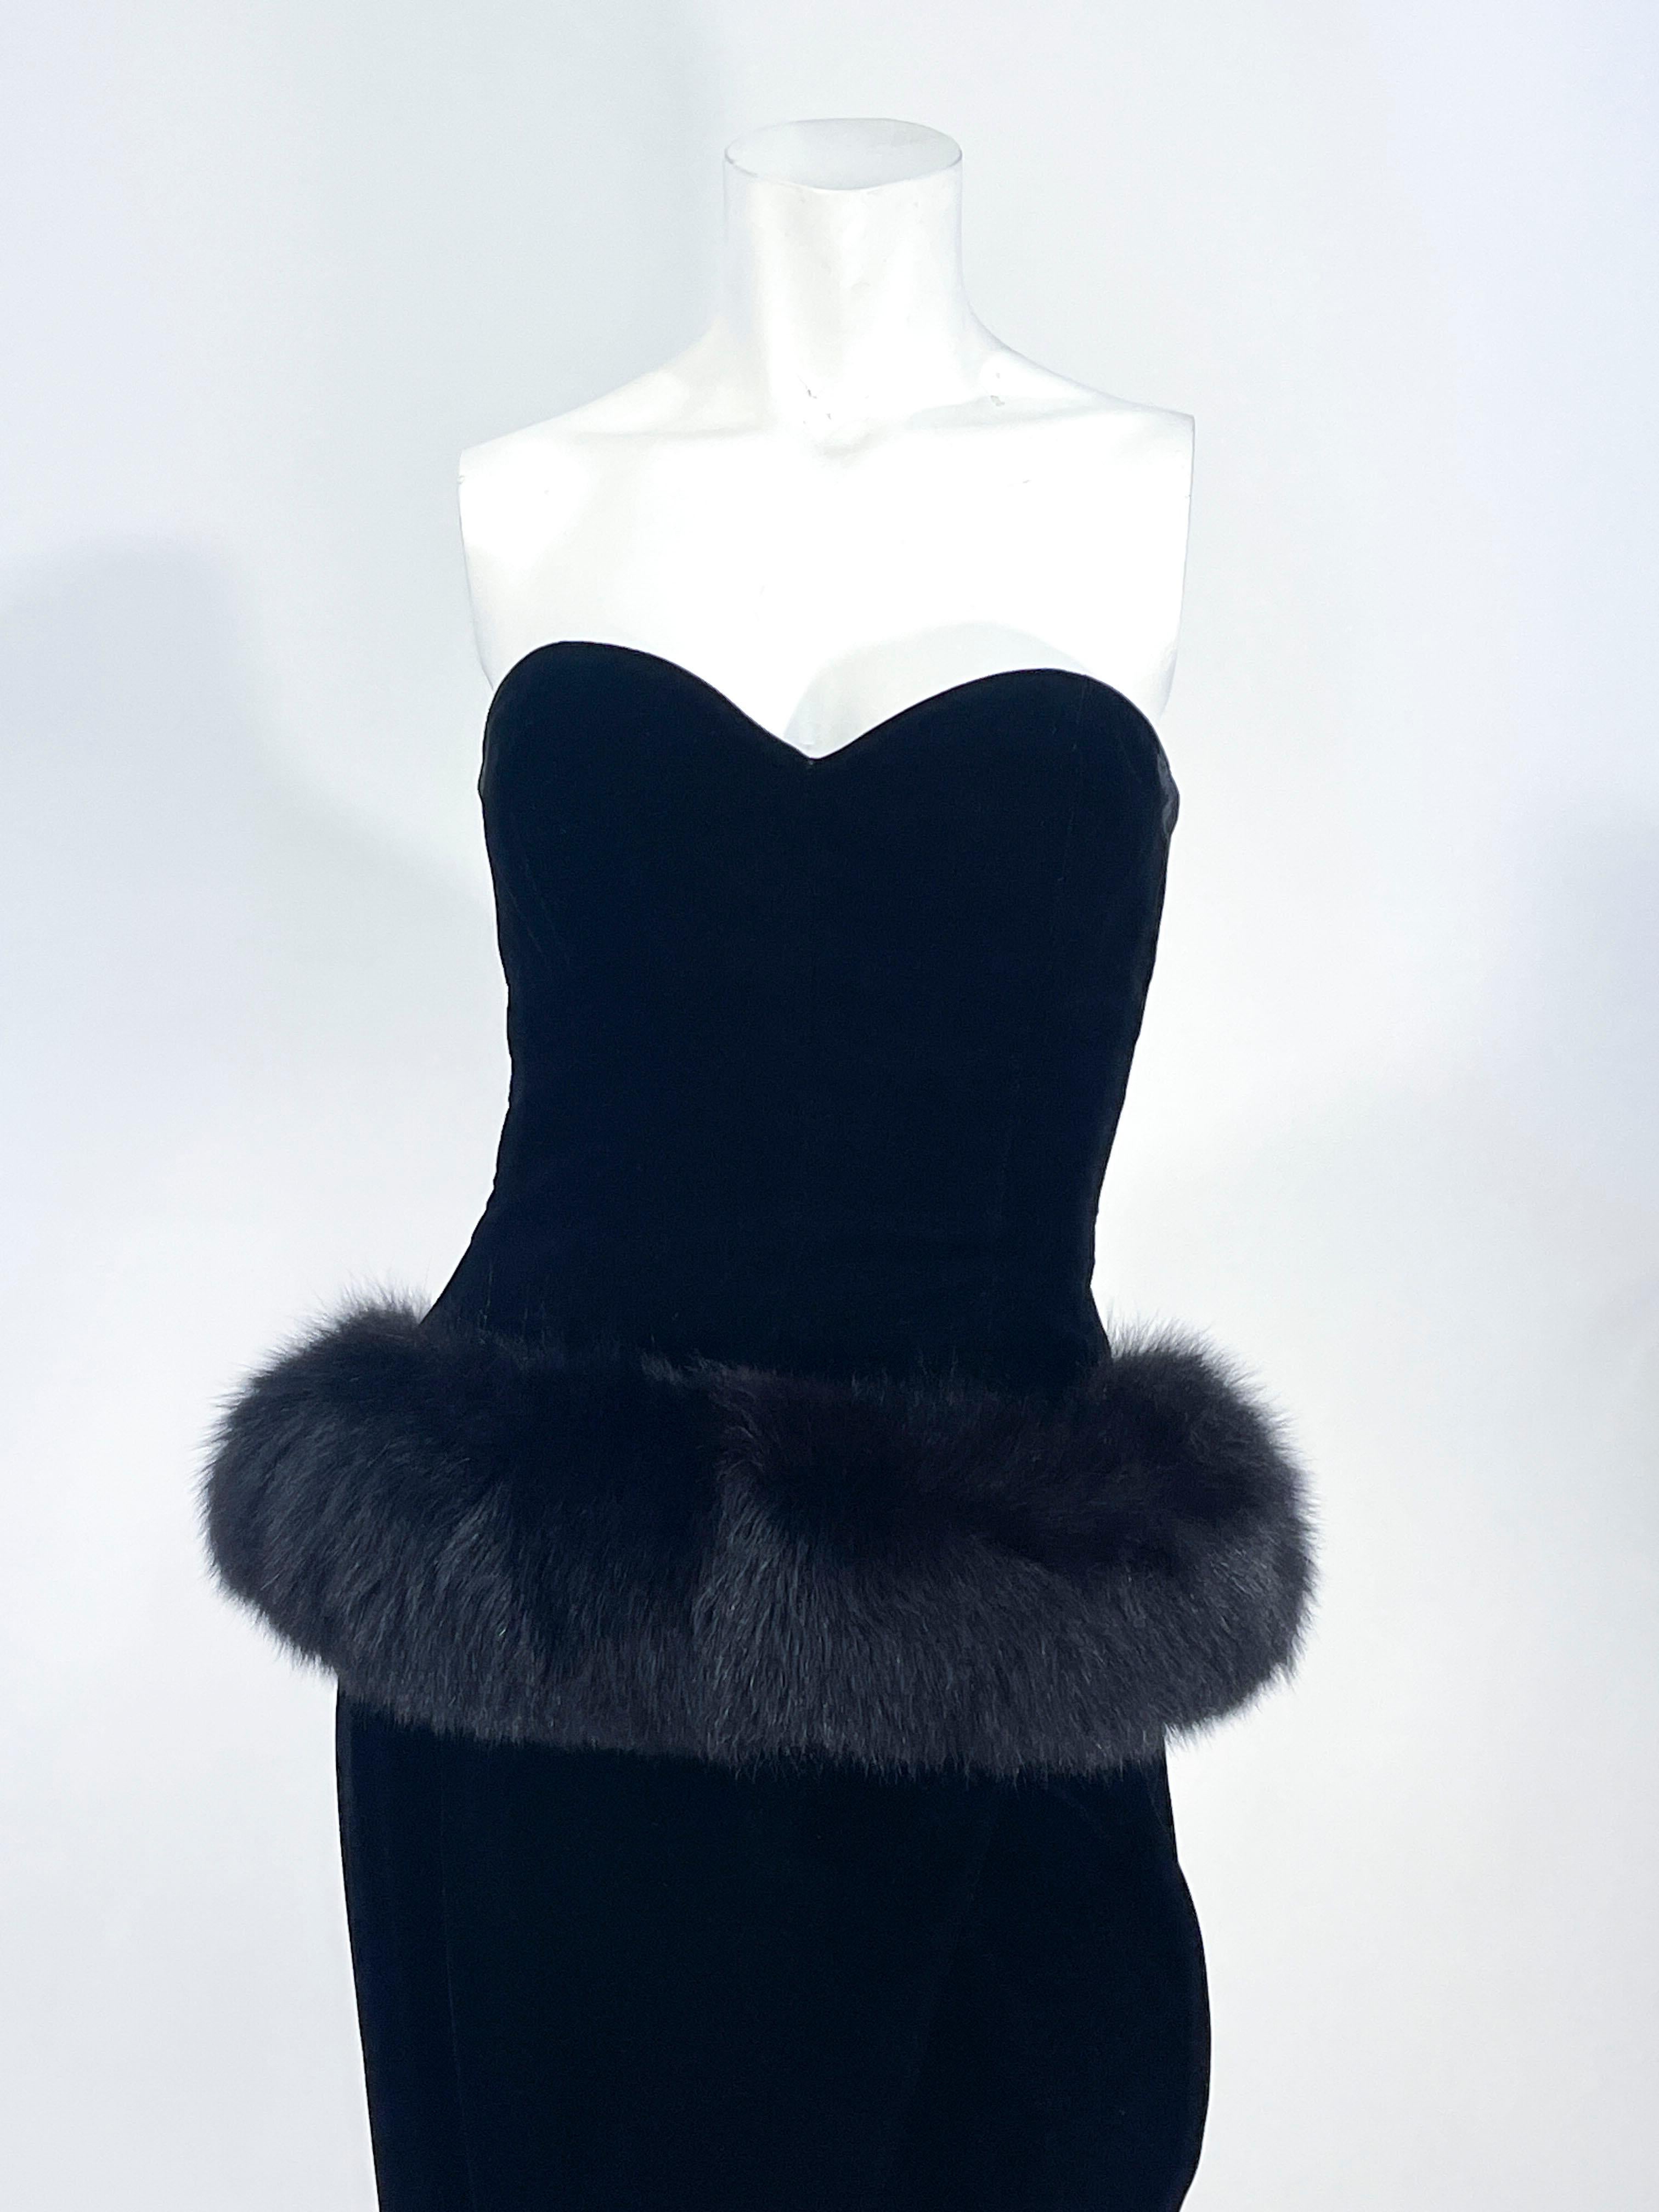 1980s Victor Costa black velvet strapless column dress. The fitted bodice has a sweetheart neckline and interior boning for structure down to the waist. The waist features an enlarged black fox fur peplum that hugs to the back of the waist. The wrap